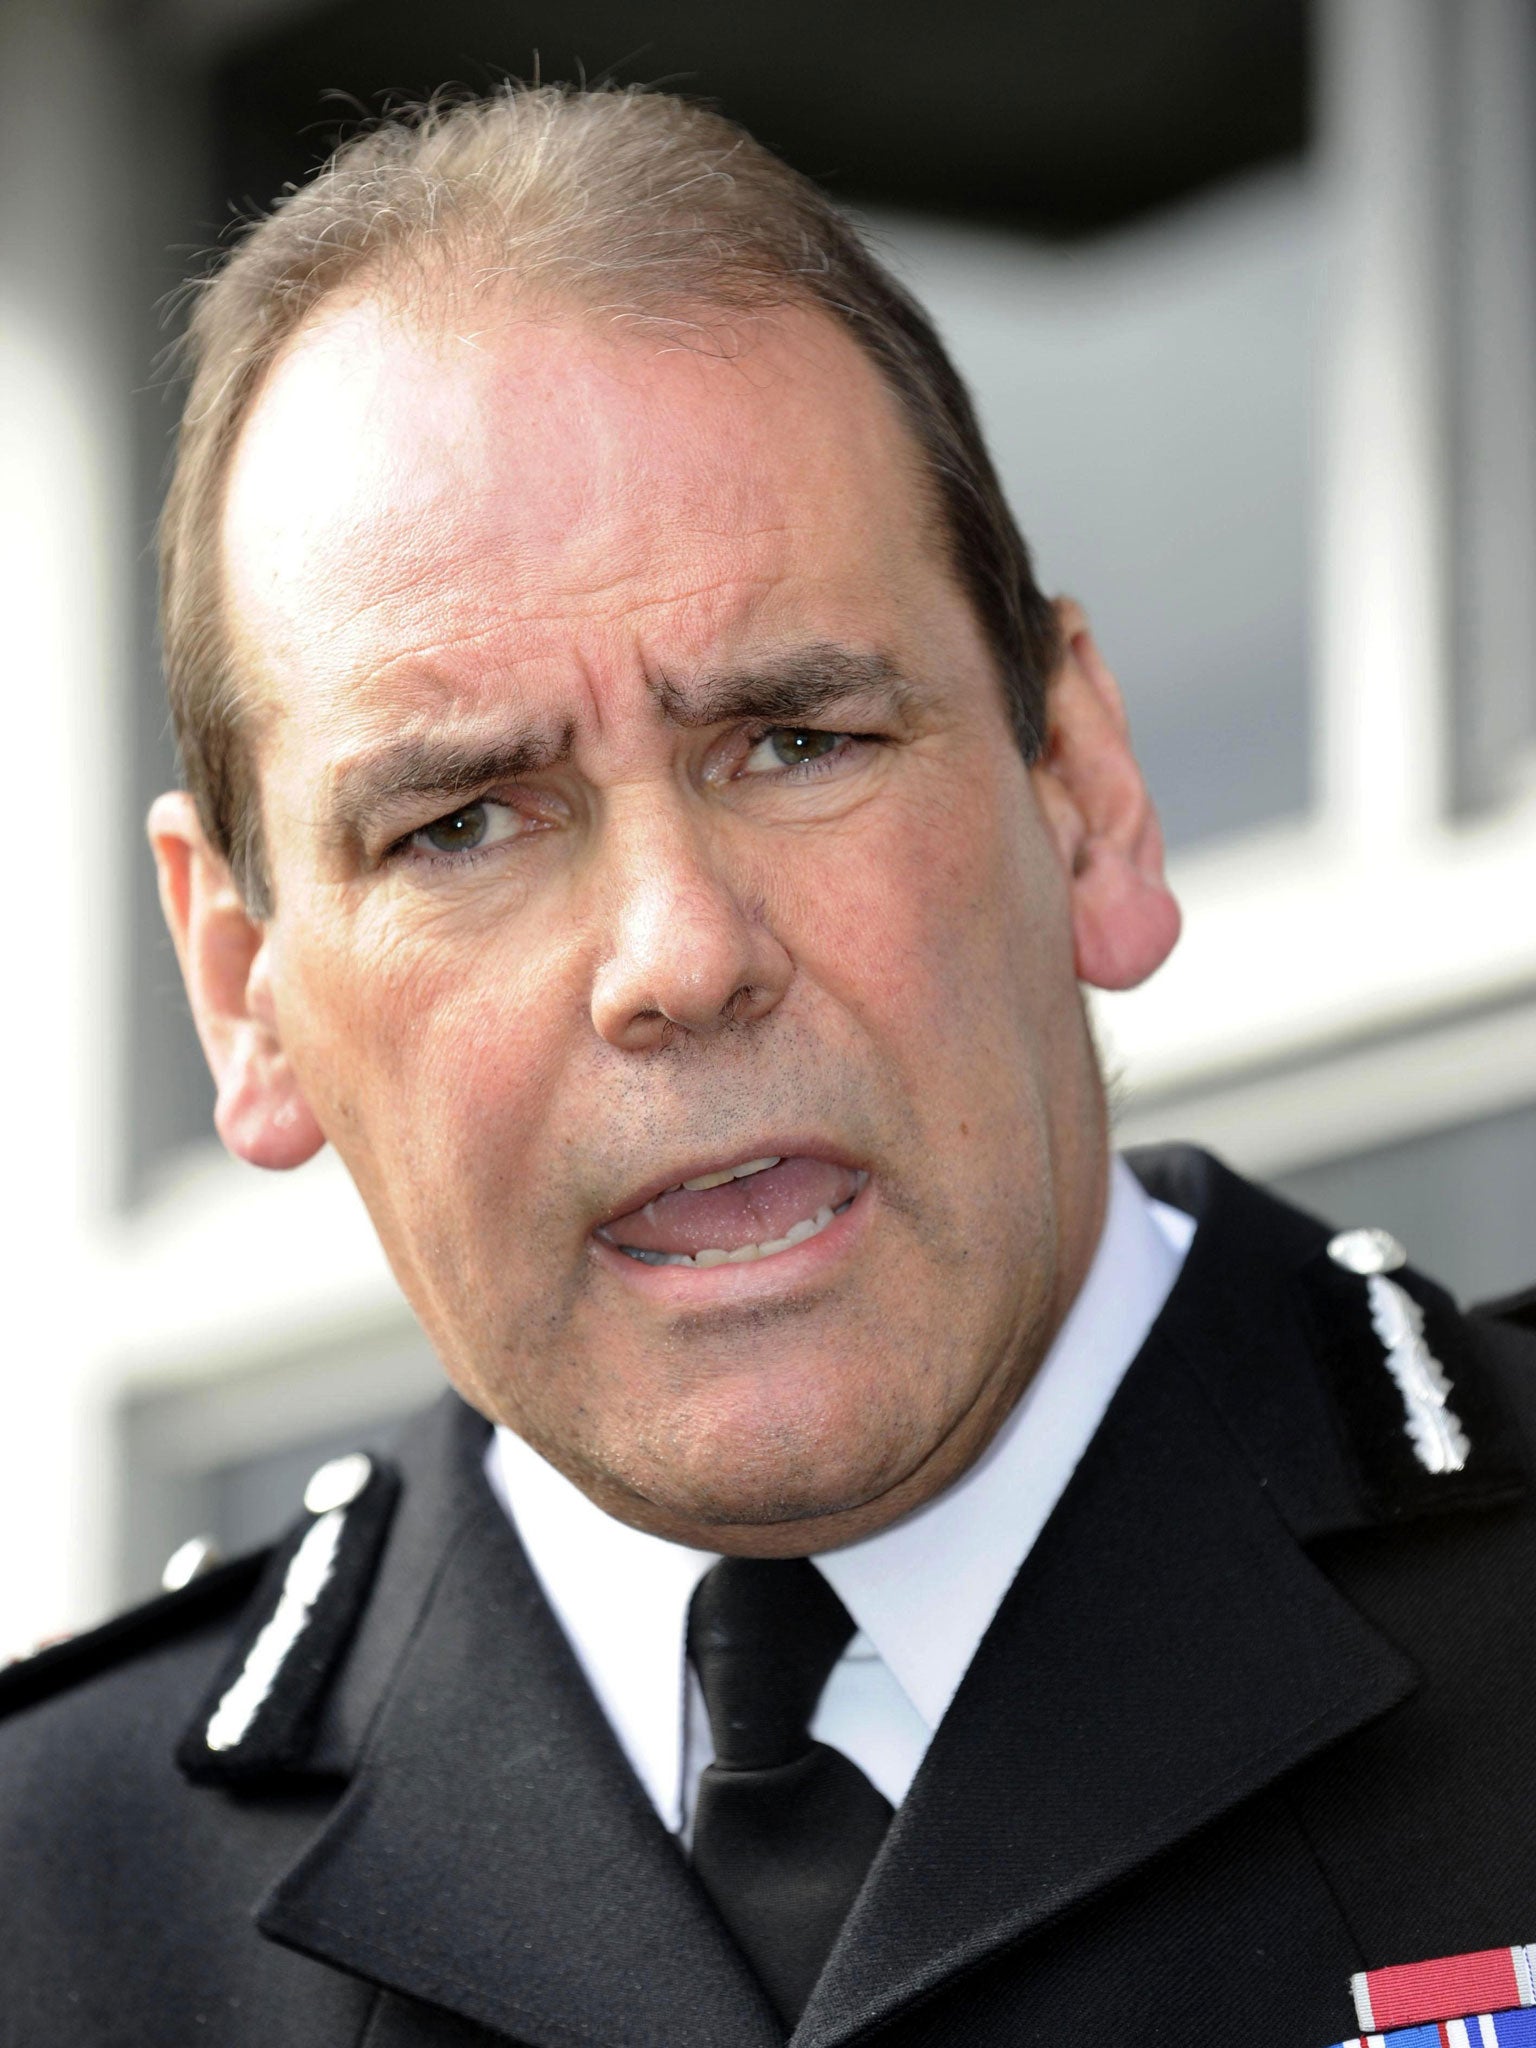 Former police chief Sir Norman Bettison